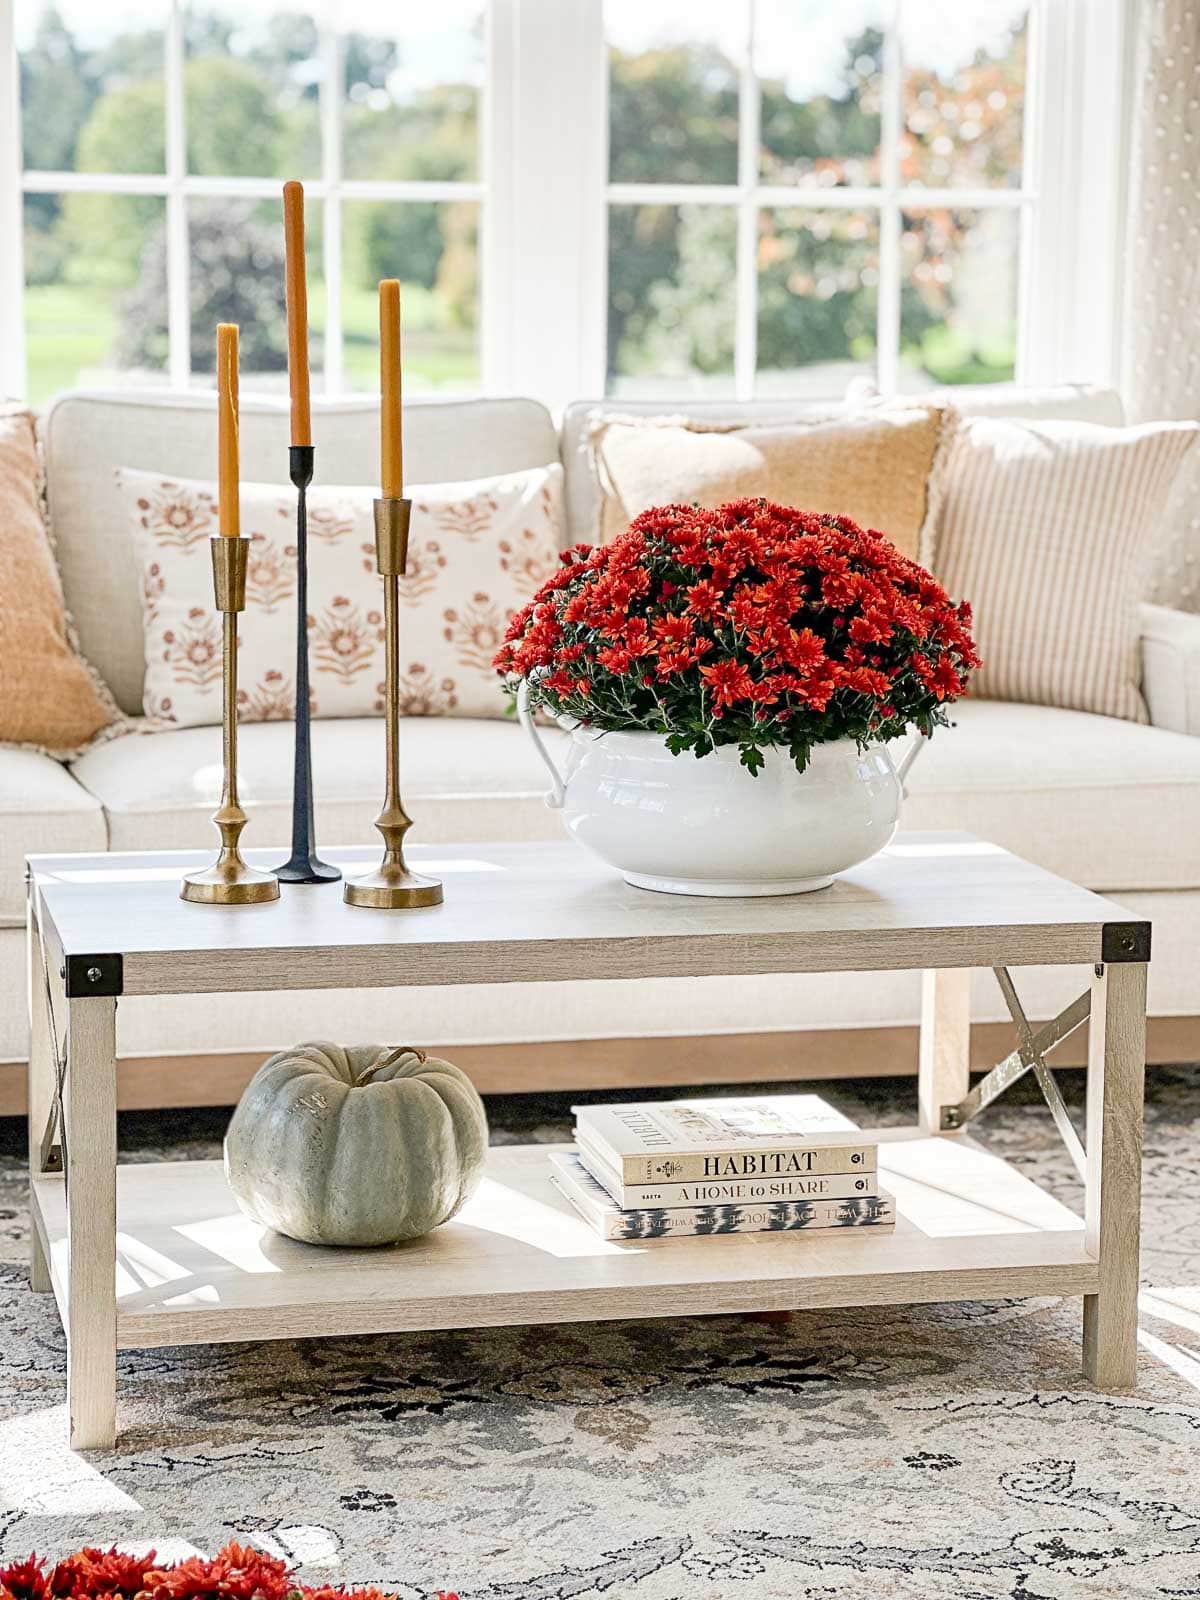 6 Tips For Decorating A Small Space For Fall And Thanksgiving